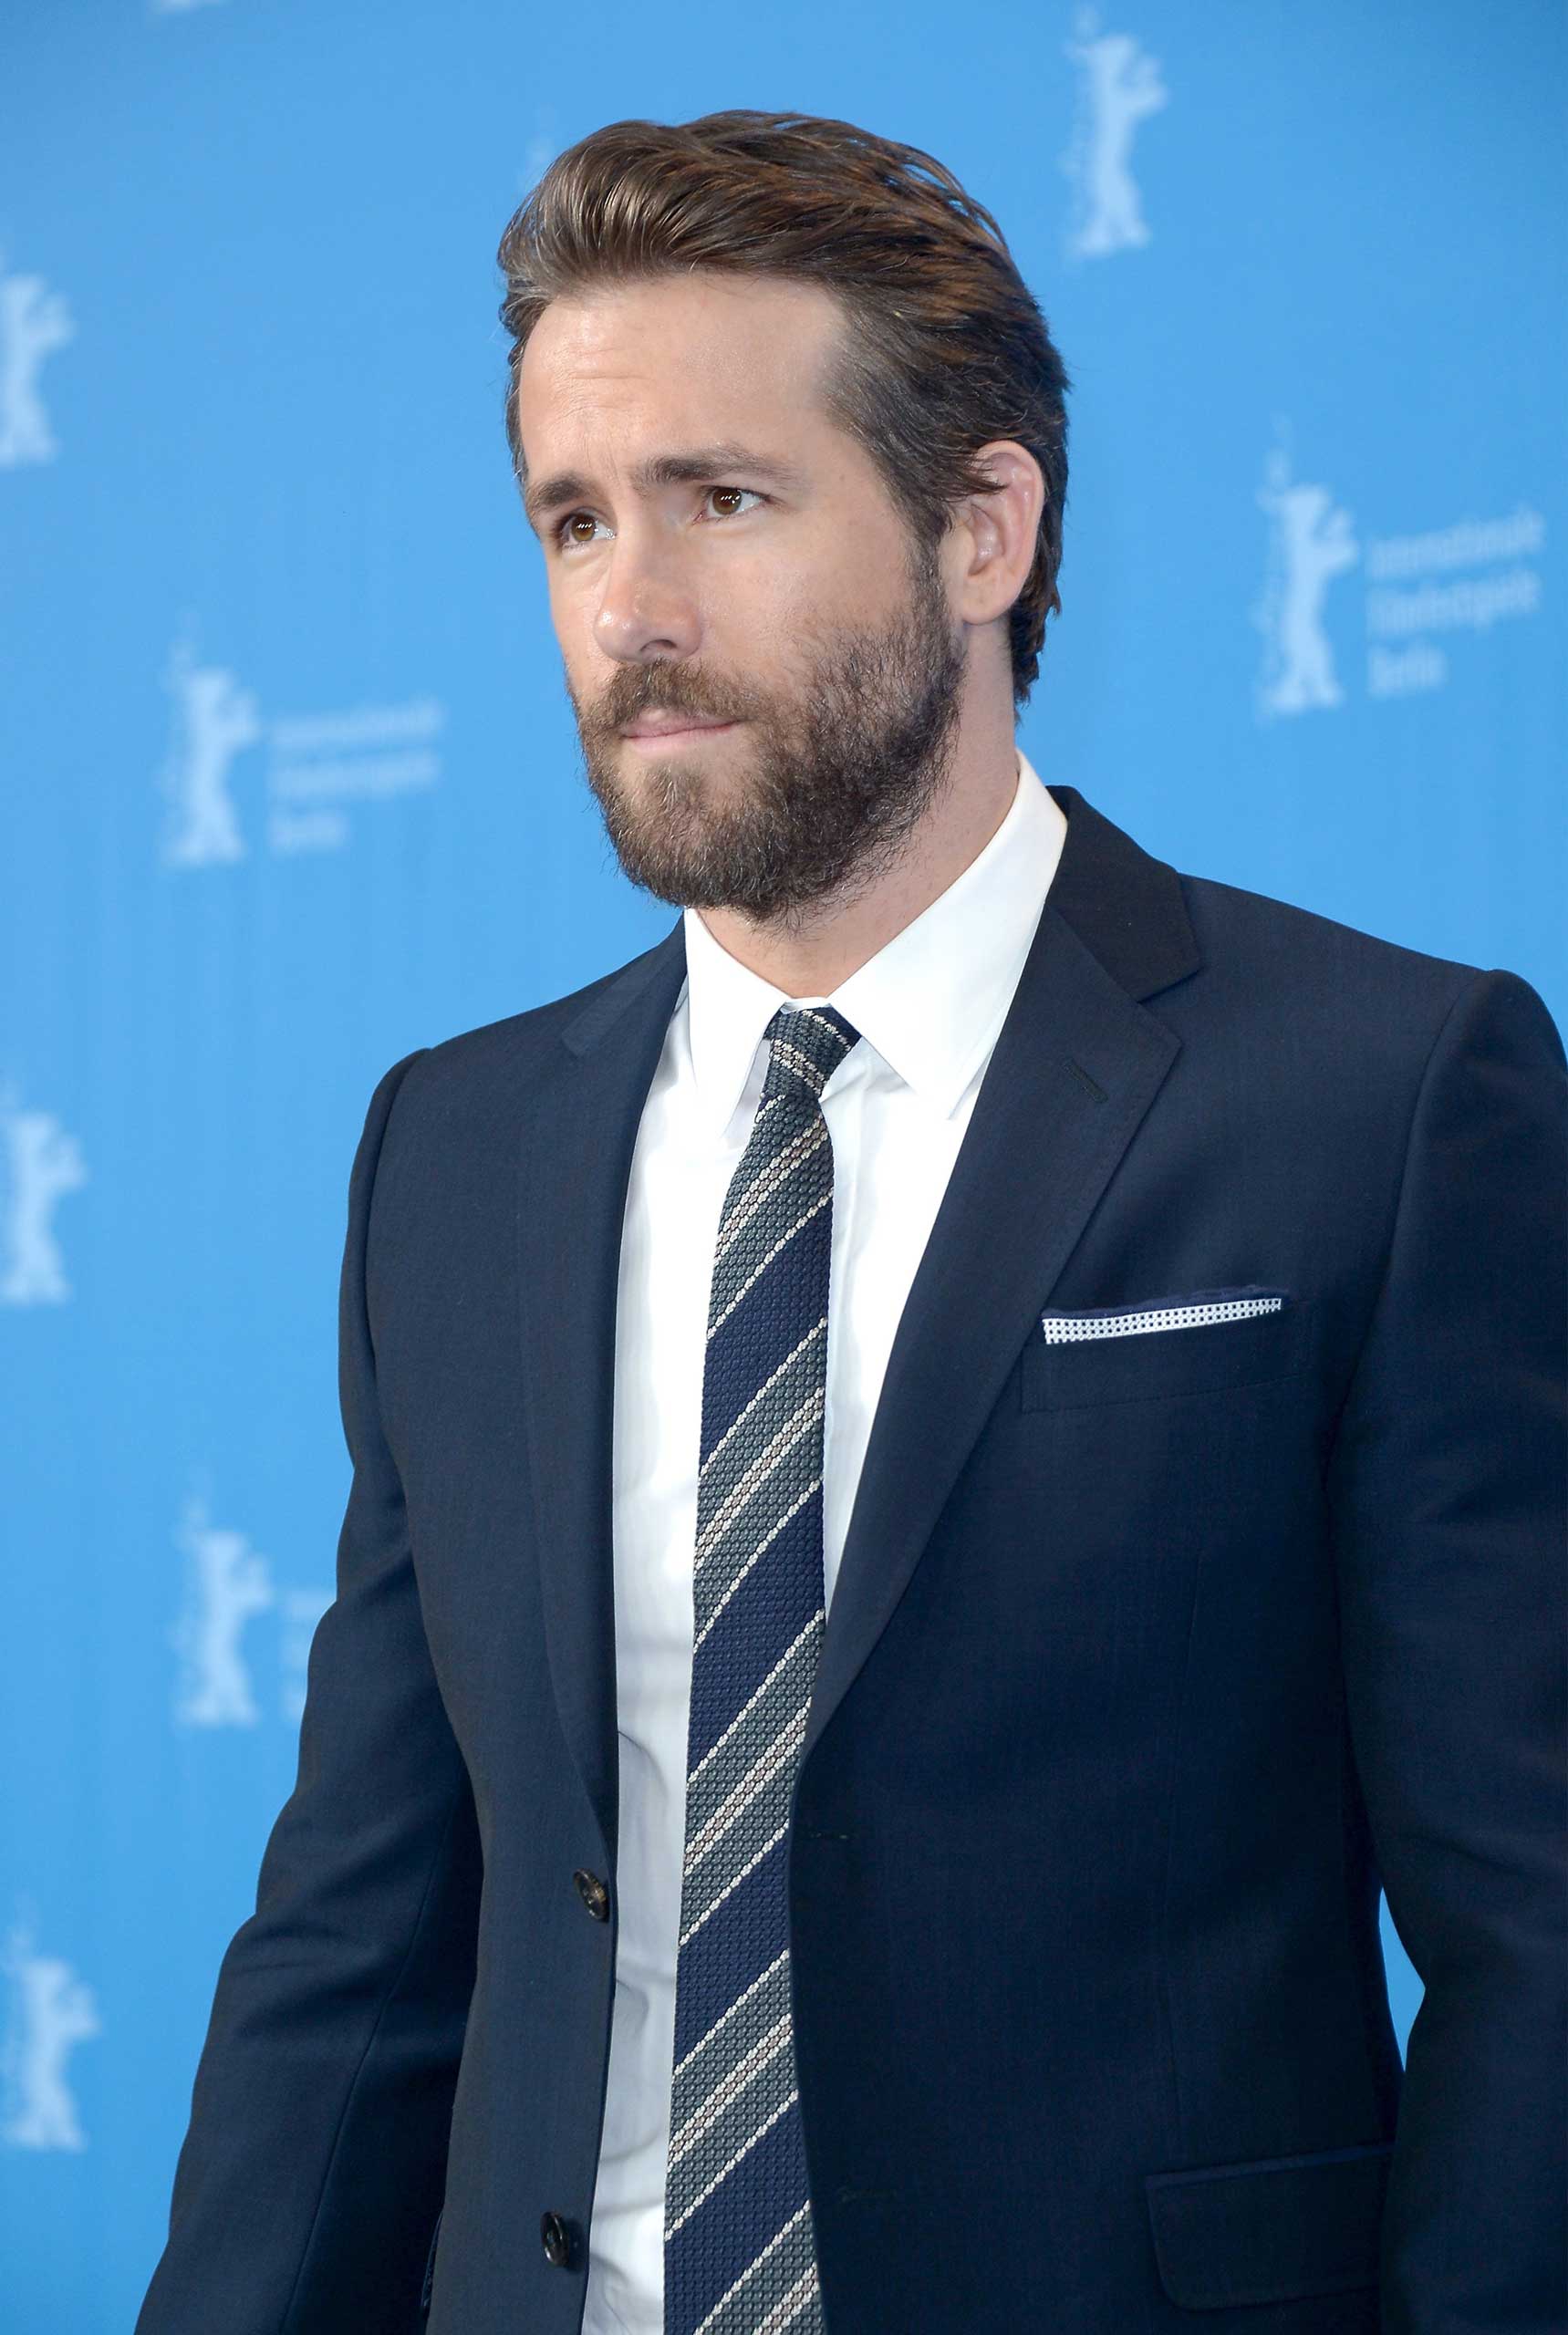 Ryan Reynolds attends the 'Woman in Gold' press conference during the 65th Berlinale International Film Festival at Grand Hyatt Hotel in Berlin on Feb. 9, 2015. (Dominique Charriau—WireImage/Getty Images)